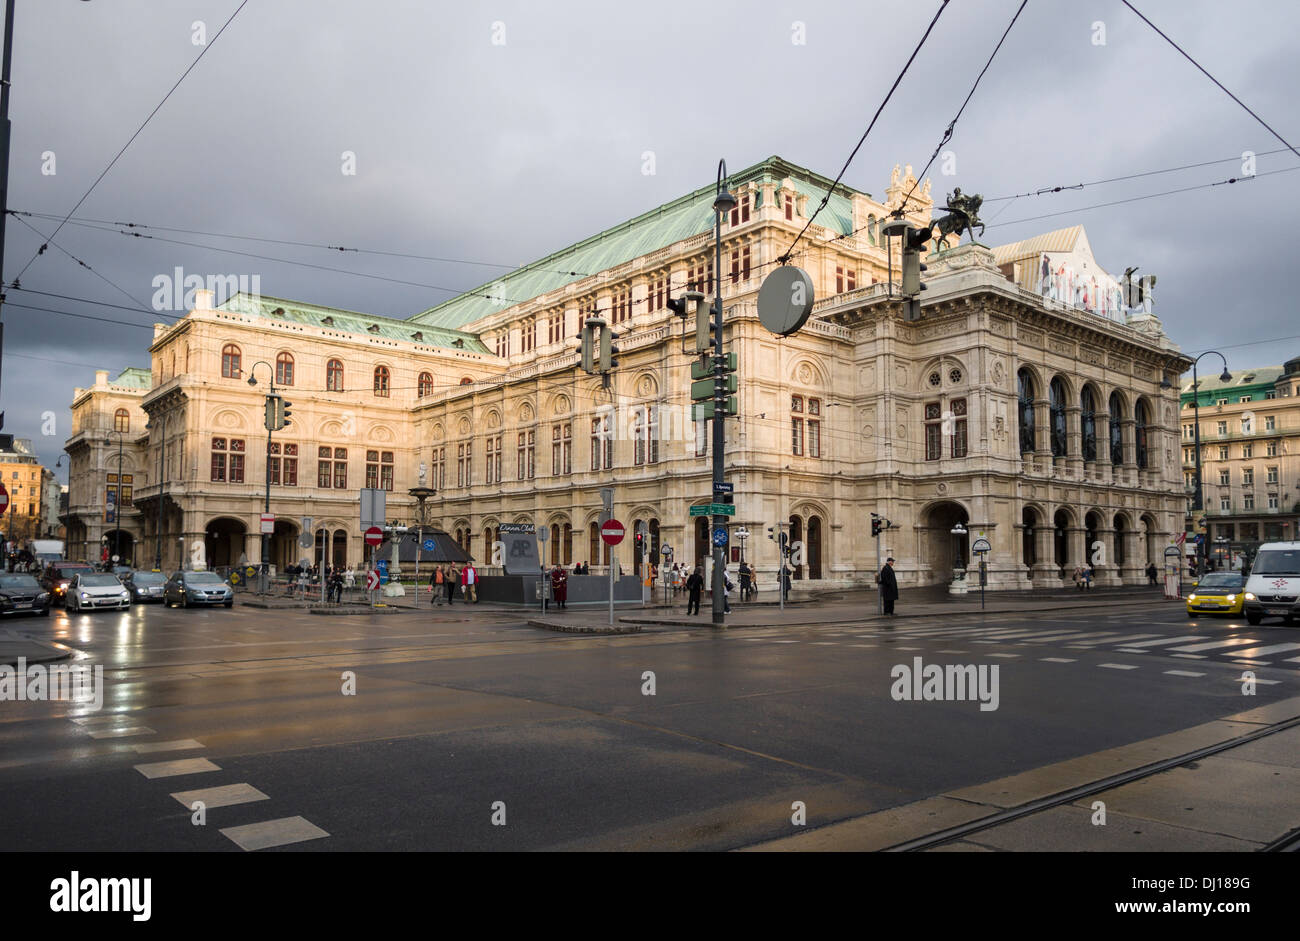 Vienna Opera House and the Ringstrasse at sunset. A damp road highlights the massive stone building. Stock Photo